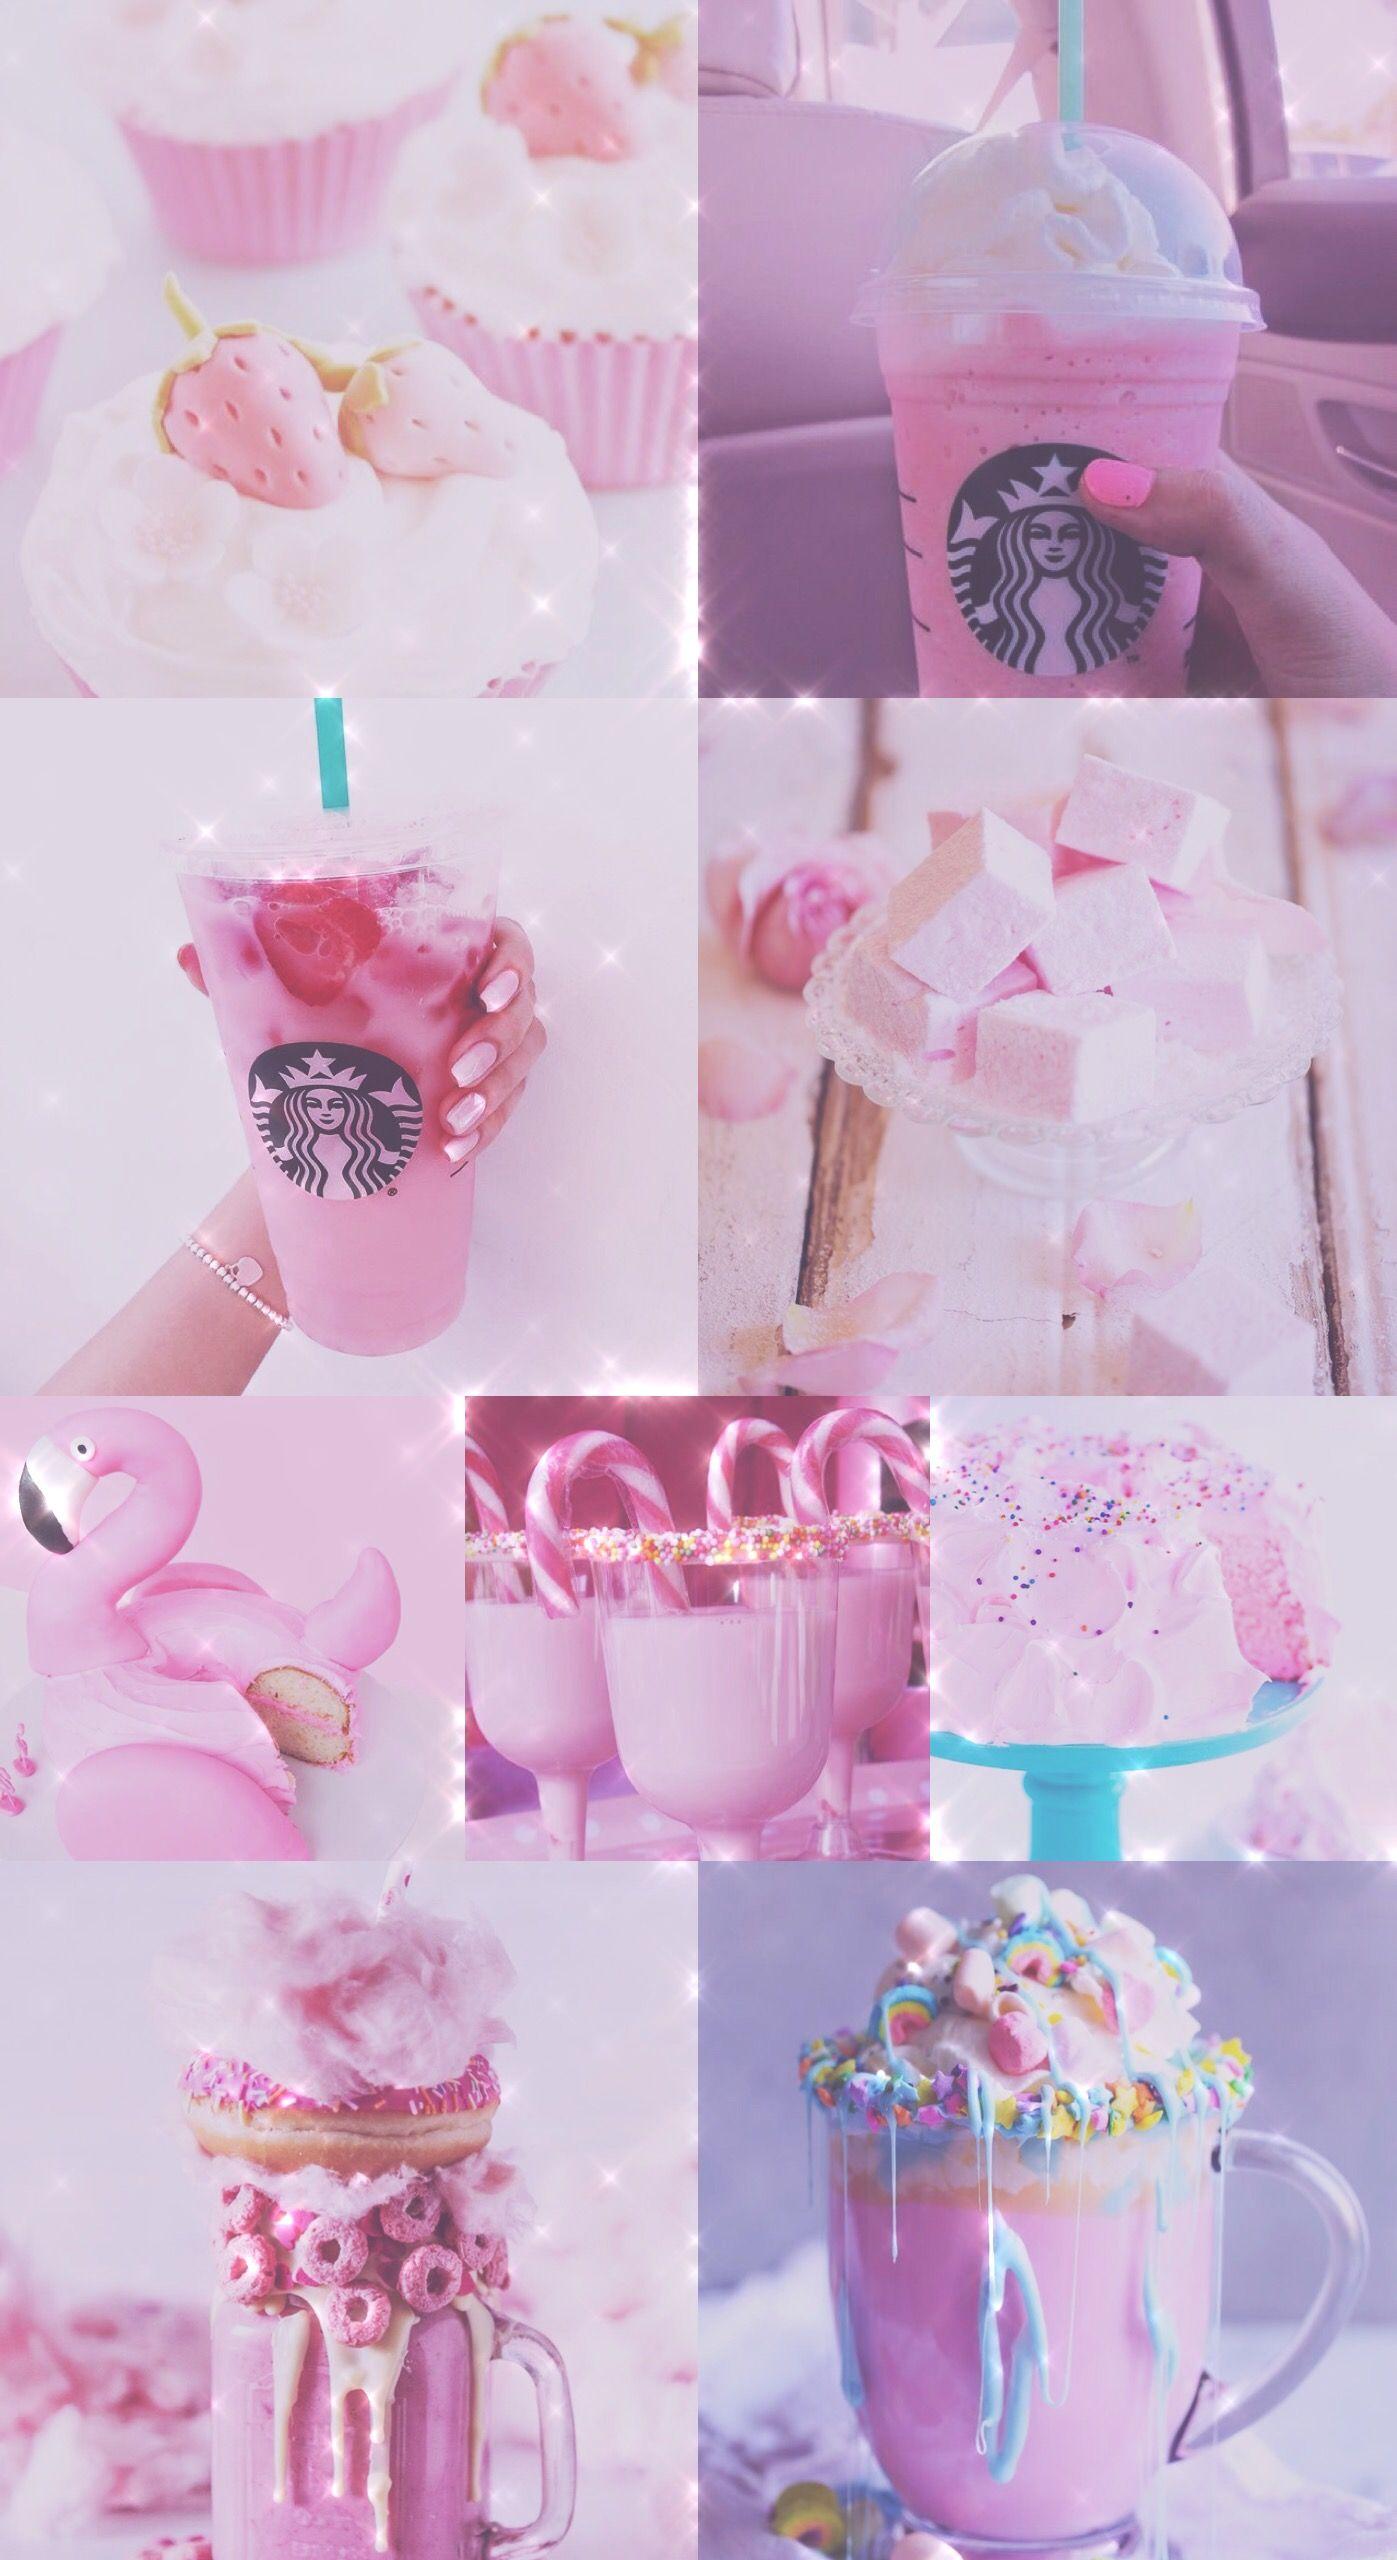 Wallpaper, background, HD, iPhone, Android, sparkly, glitter, sweets, candy, pink, Starbucks, drink. Starbucks wallpaper, Glitter wallpaper, Pink wallpaper iphone